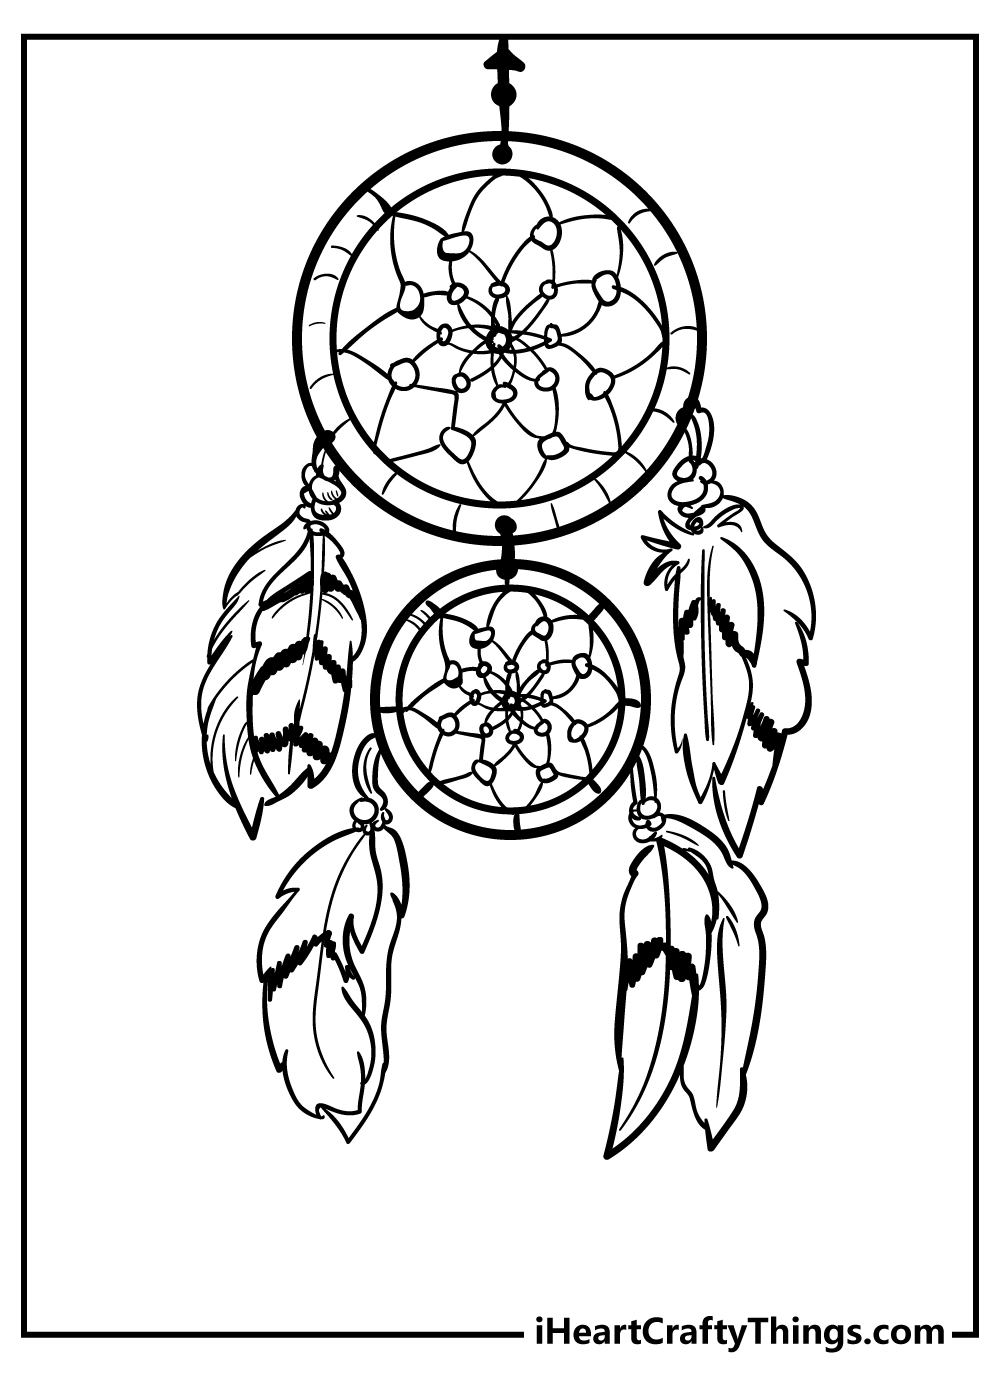 Dream Catcher Coloring Pages for preschoolers free printable